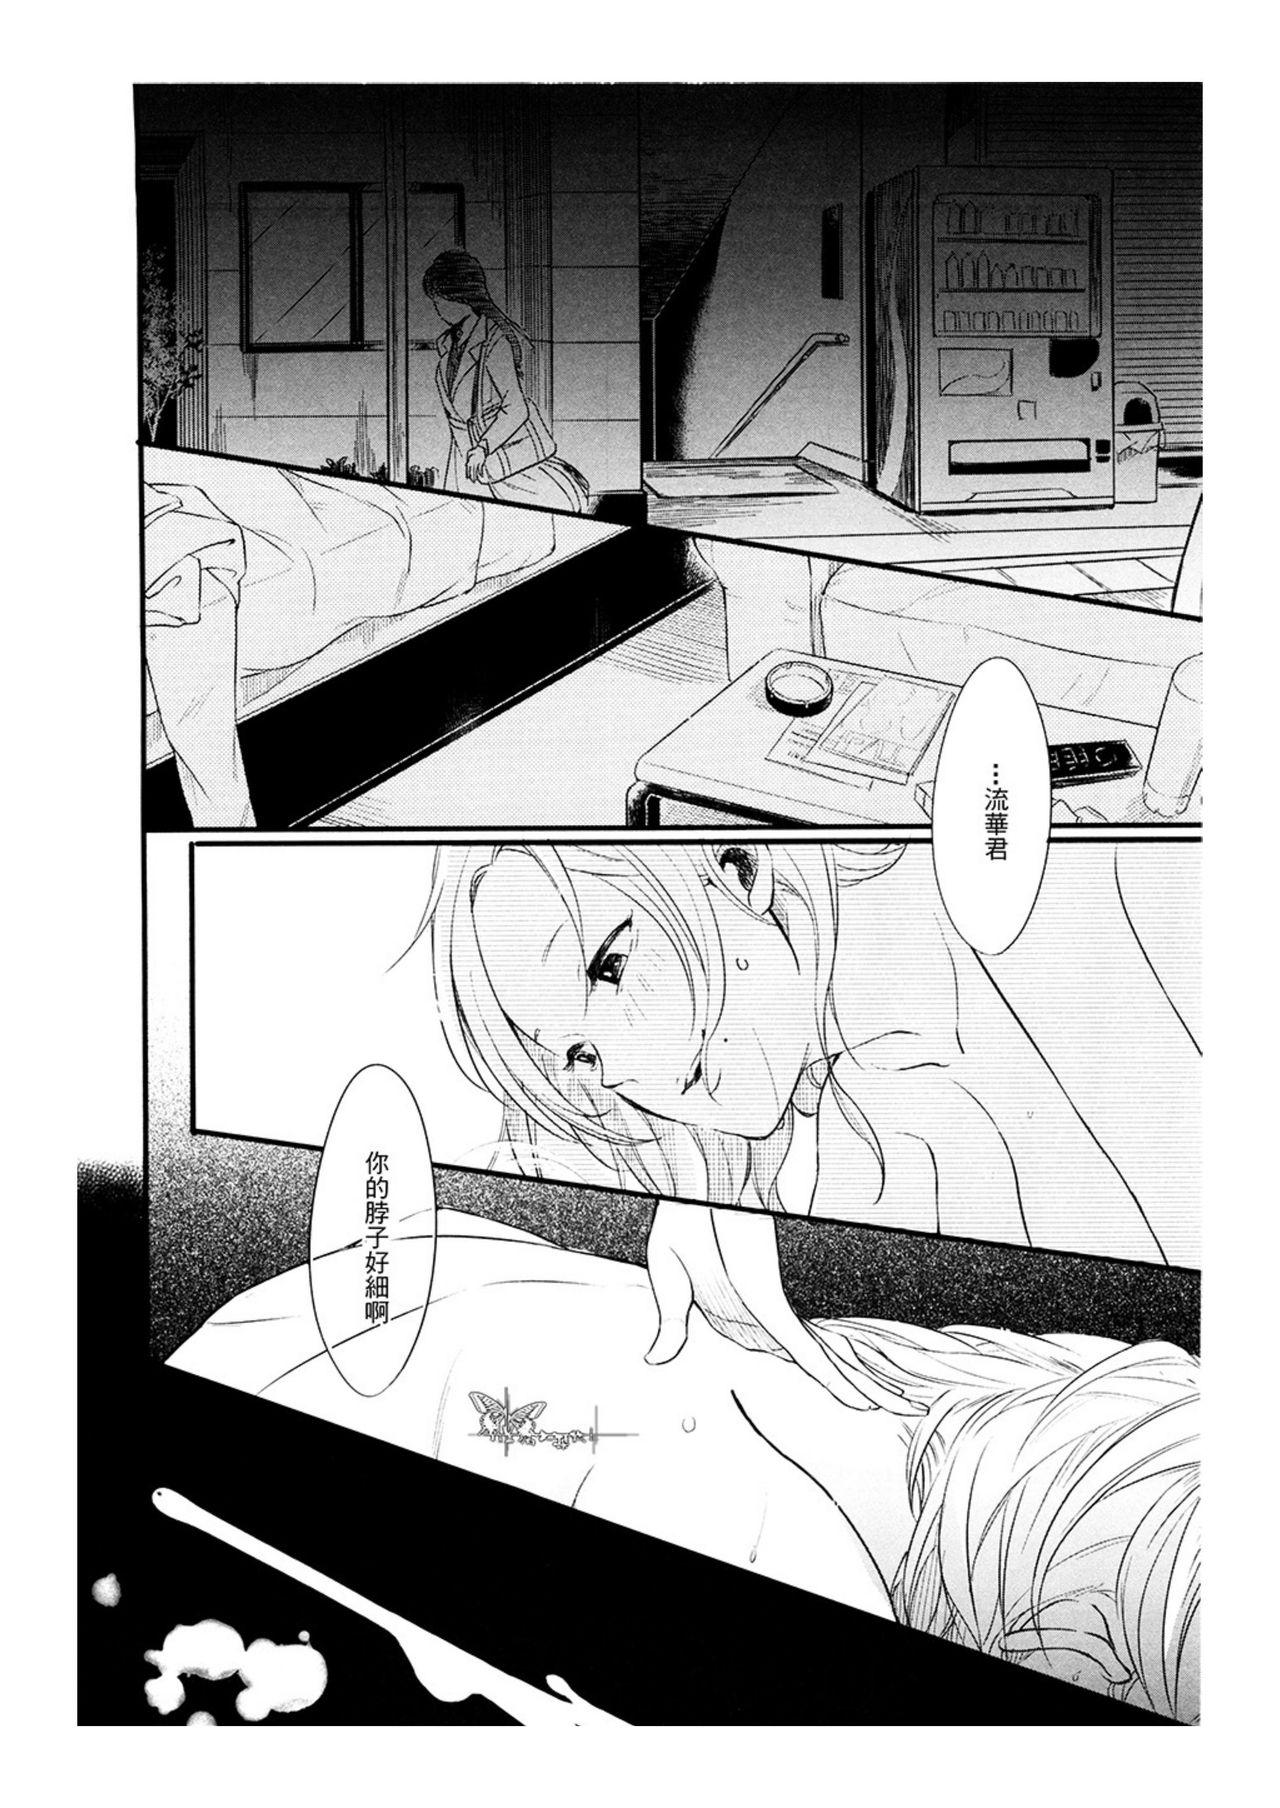 Roughsex 蛇的X福生活 第一话 Amature - Page 12